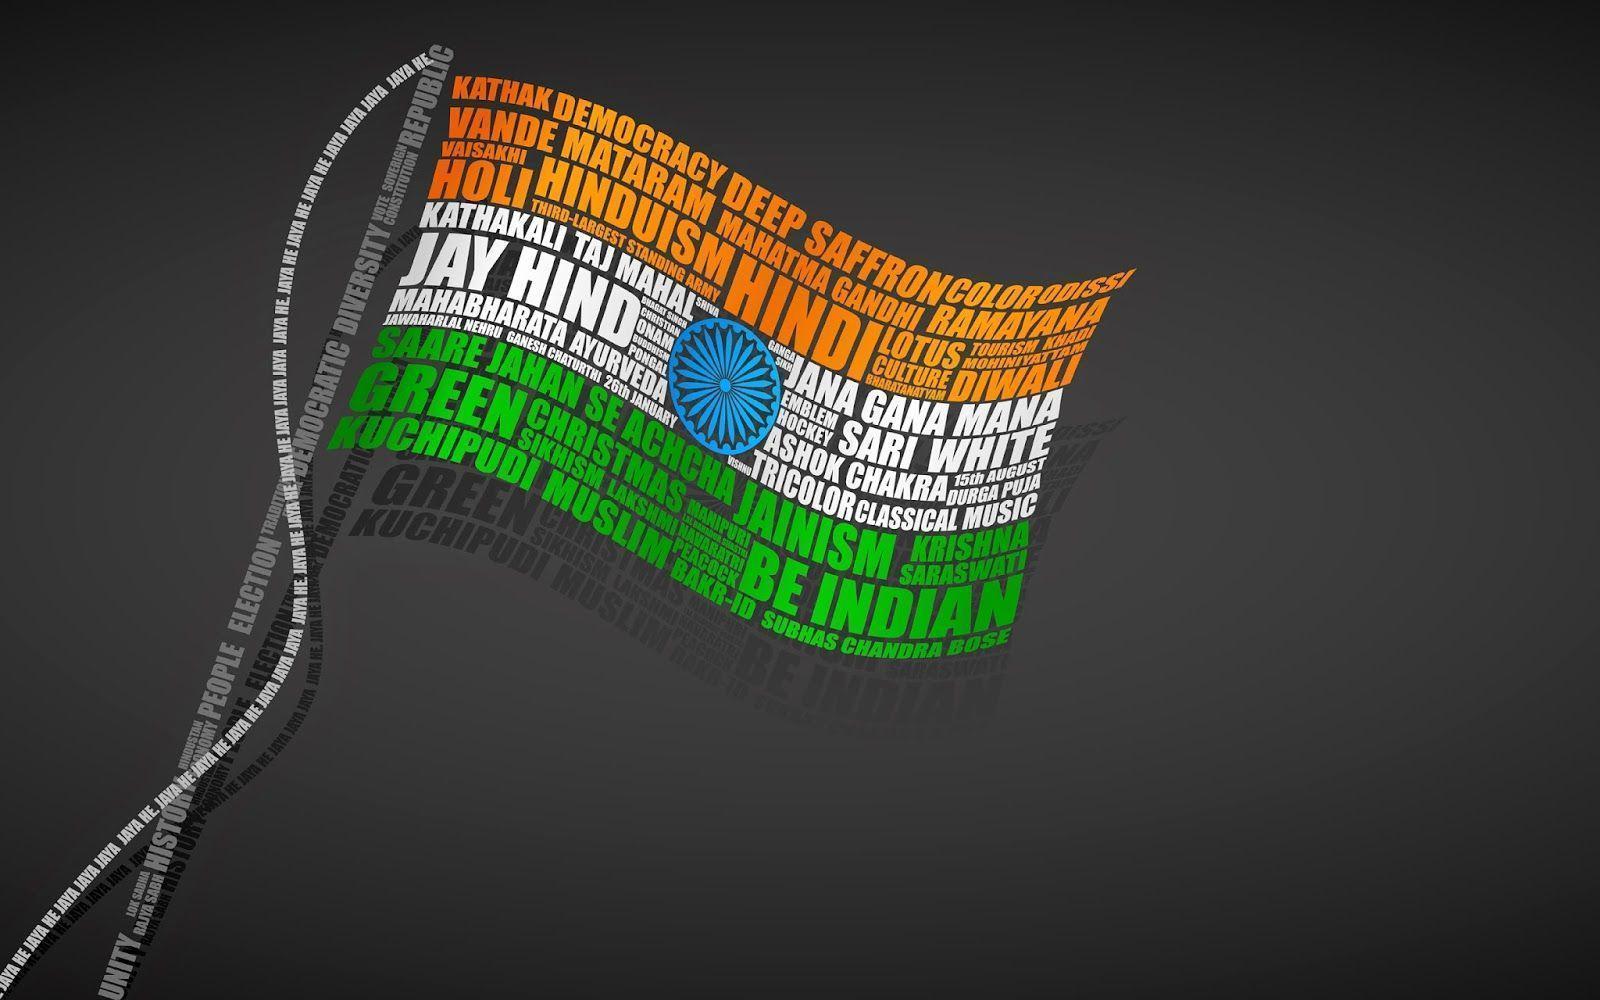 Happy Republic day 2016 messages, image, wallpaper quotes